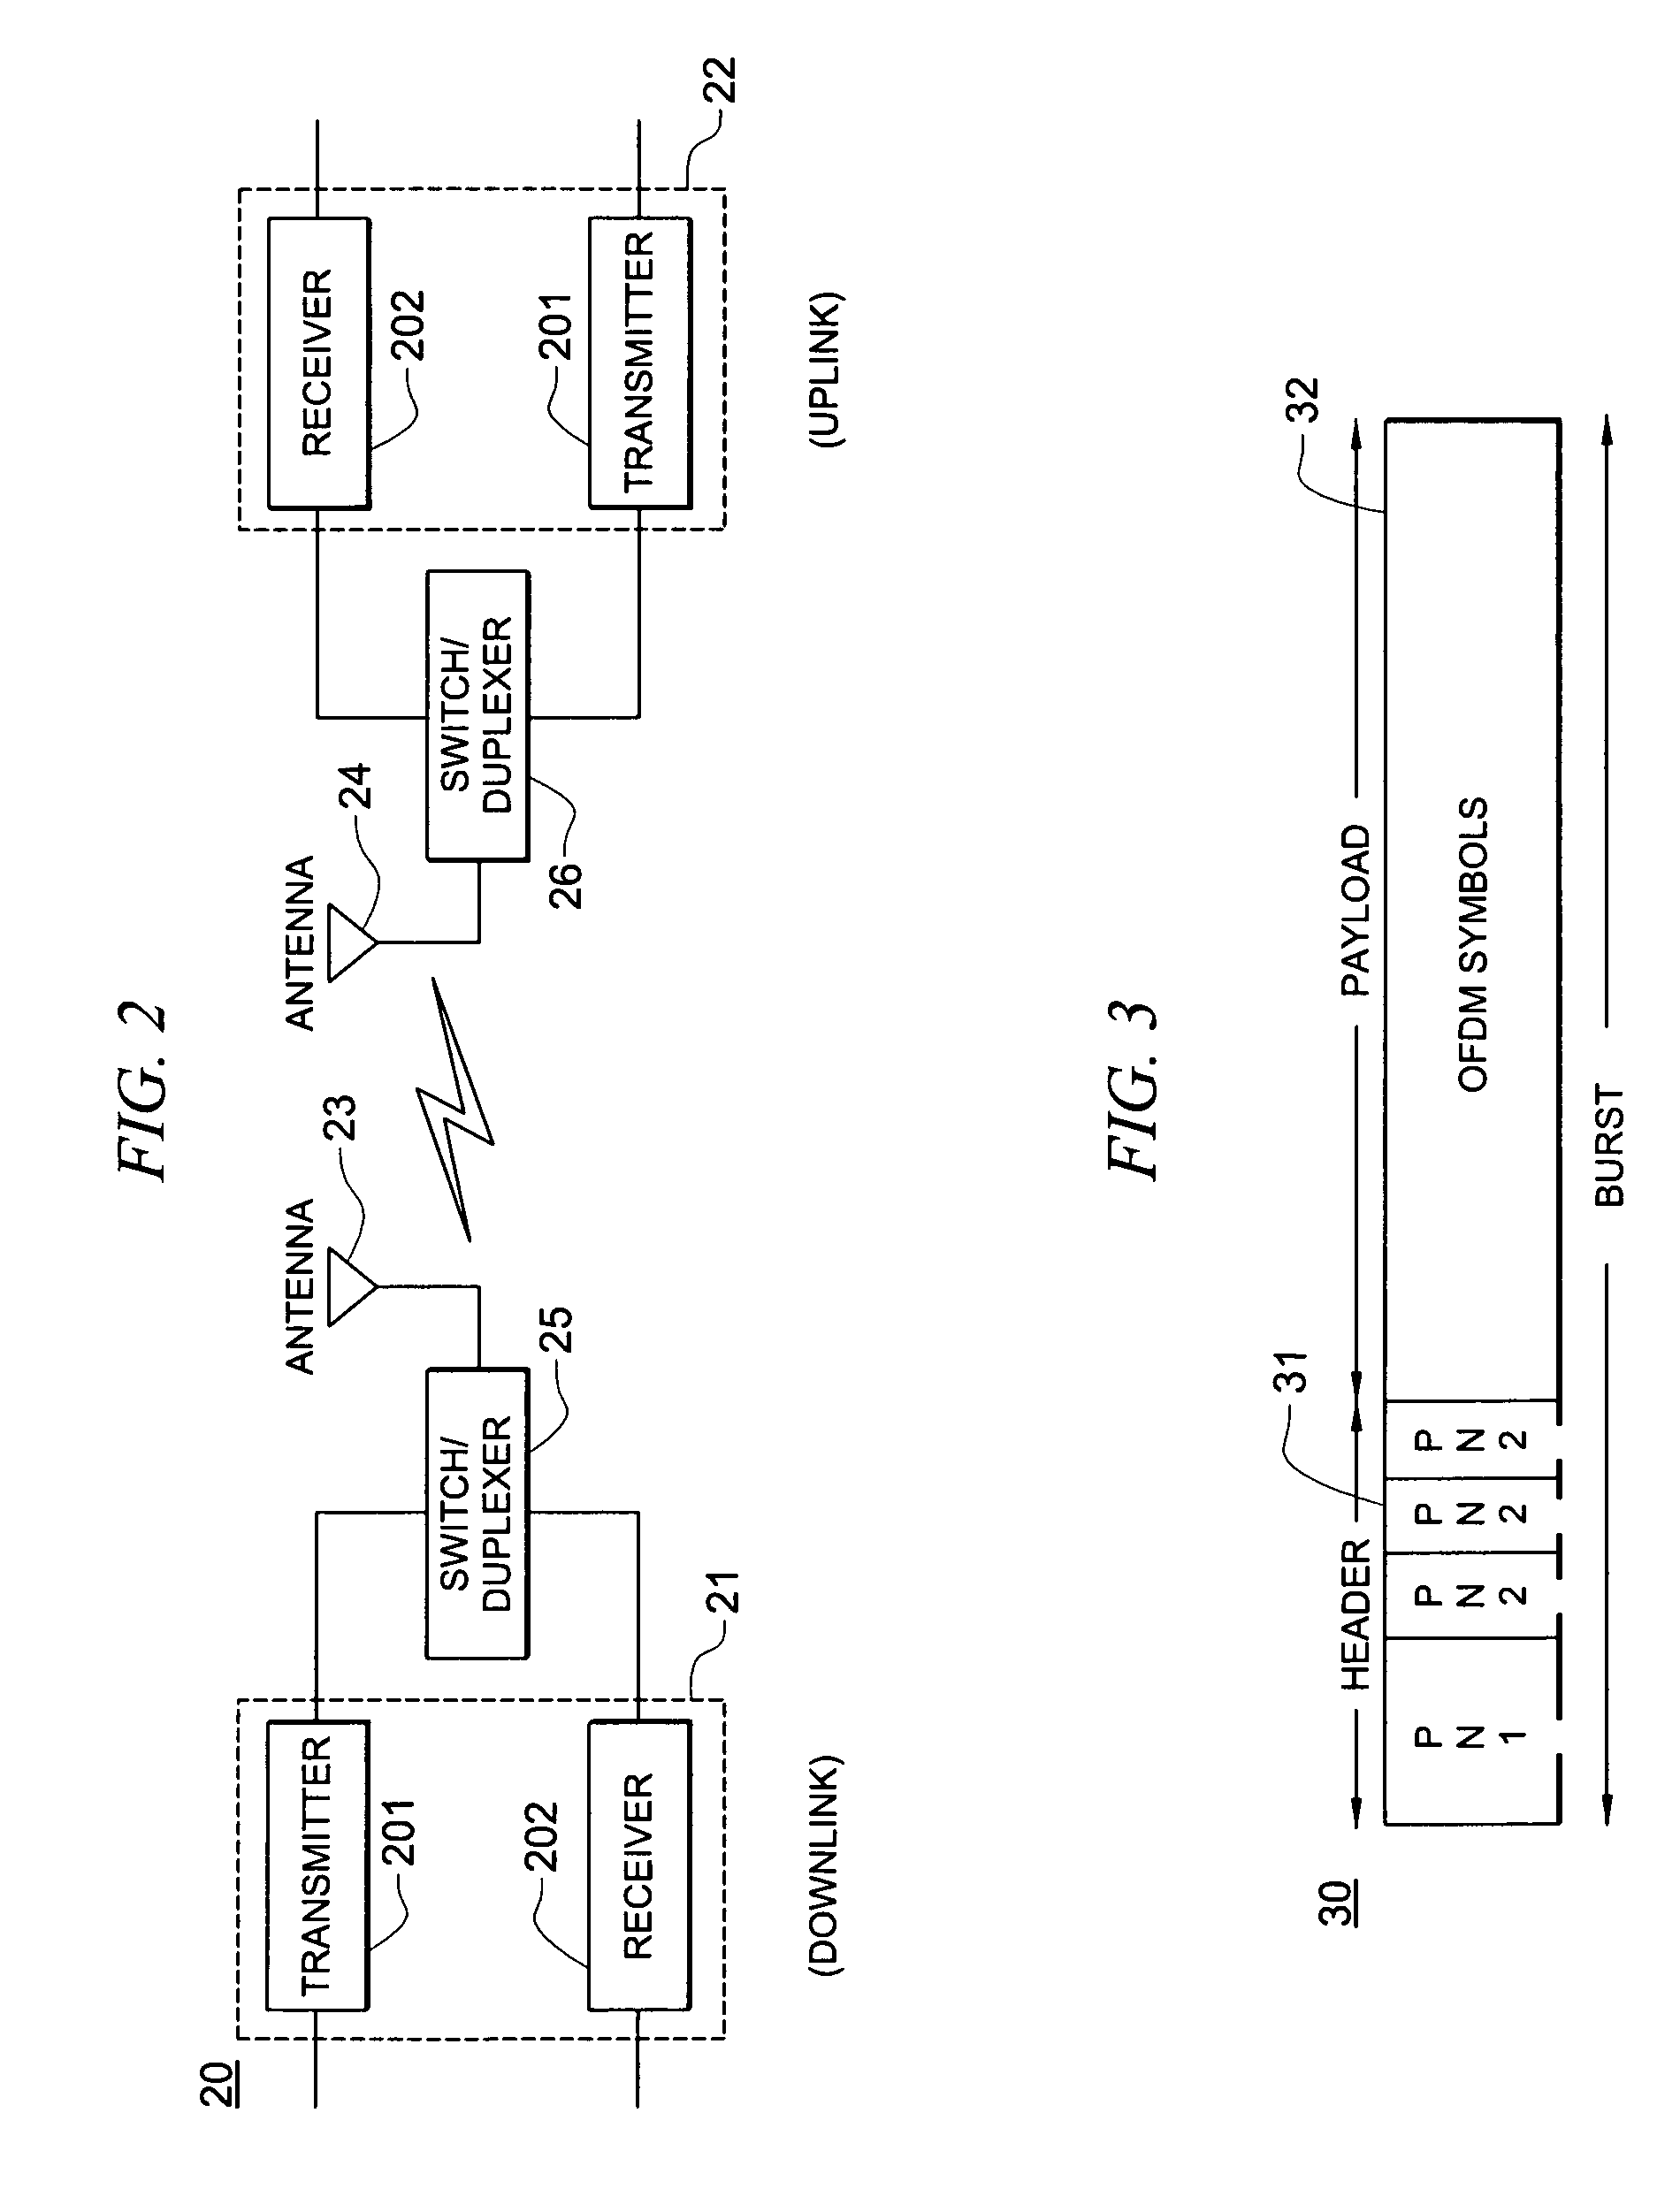 Automatic frequency offset compensation in a TDD wireless OFDM communication system